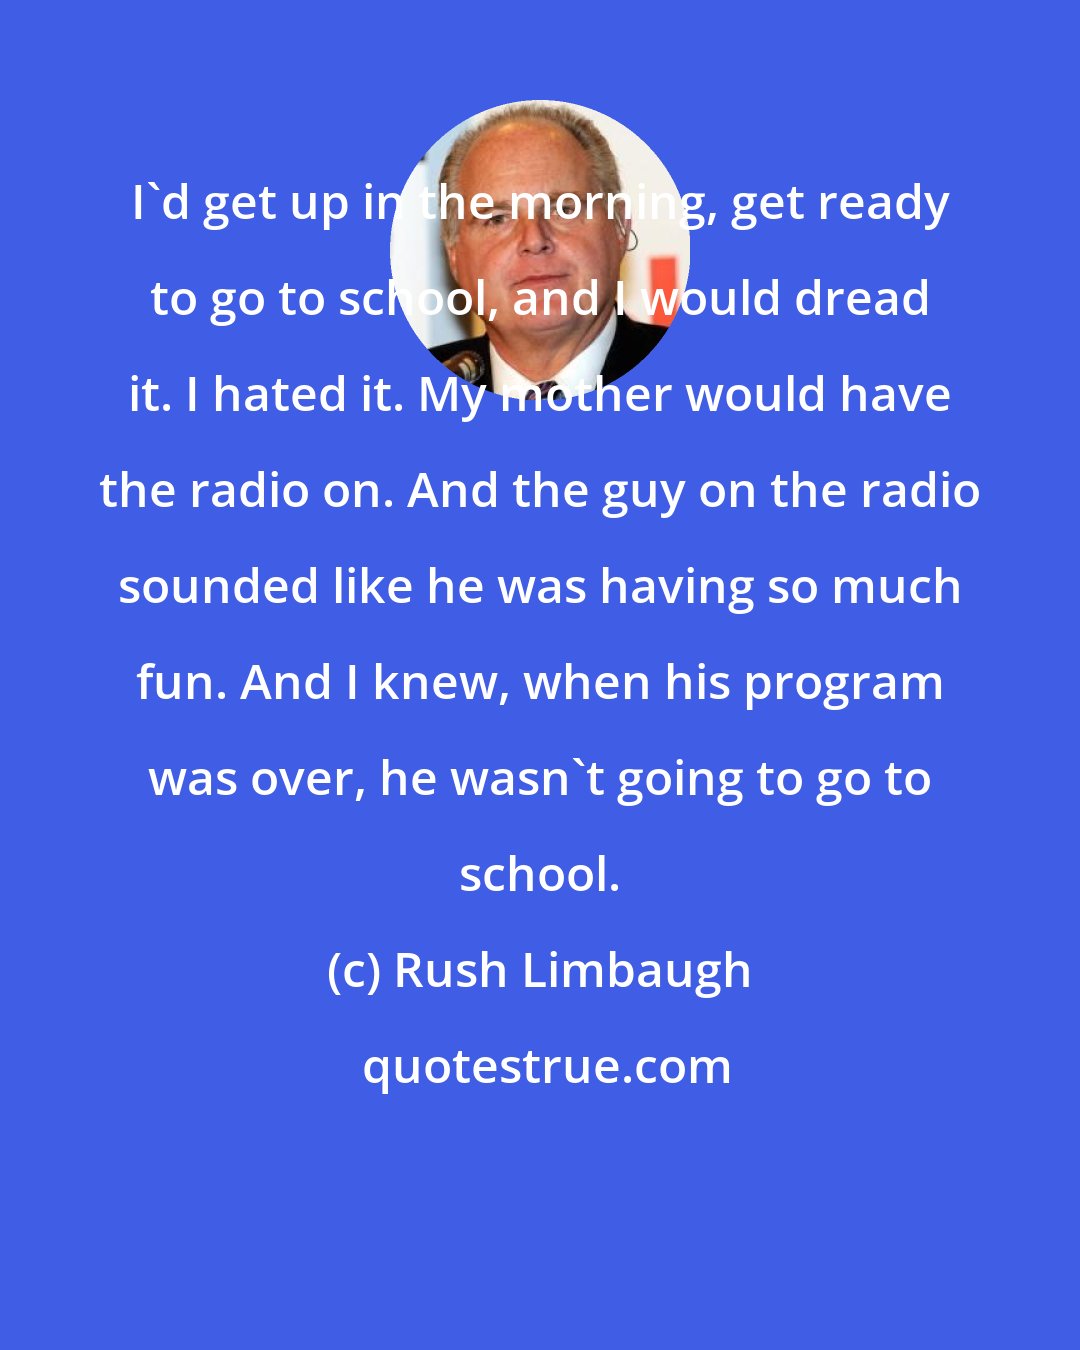 Rush Limbaugh: I'd get up in the morning, get ready to go to school, and I would dread it. I hated it. My mother would have the radio on. And the guy on the radio sounded like he was having so much fun. And I knew, when his program was over, he wasn't going to go to school.